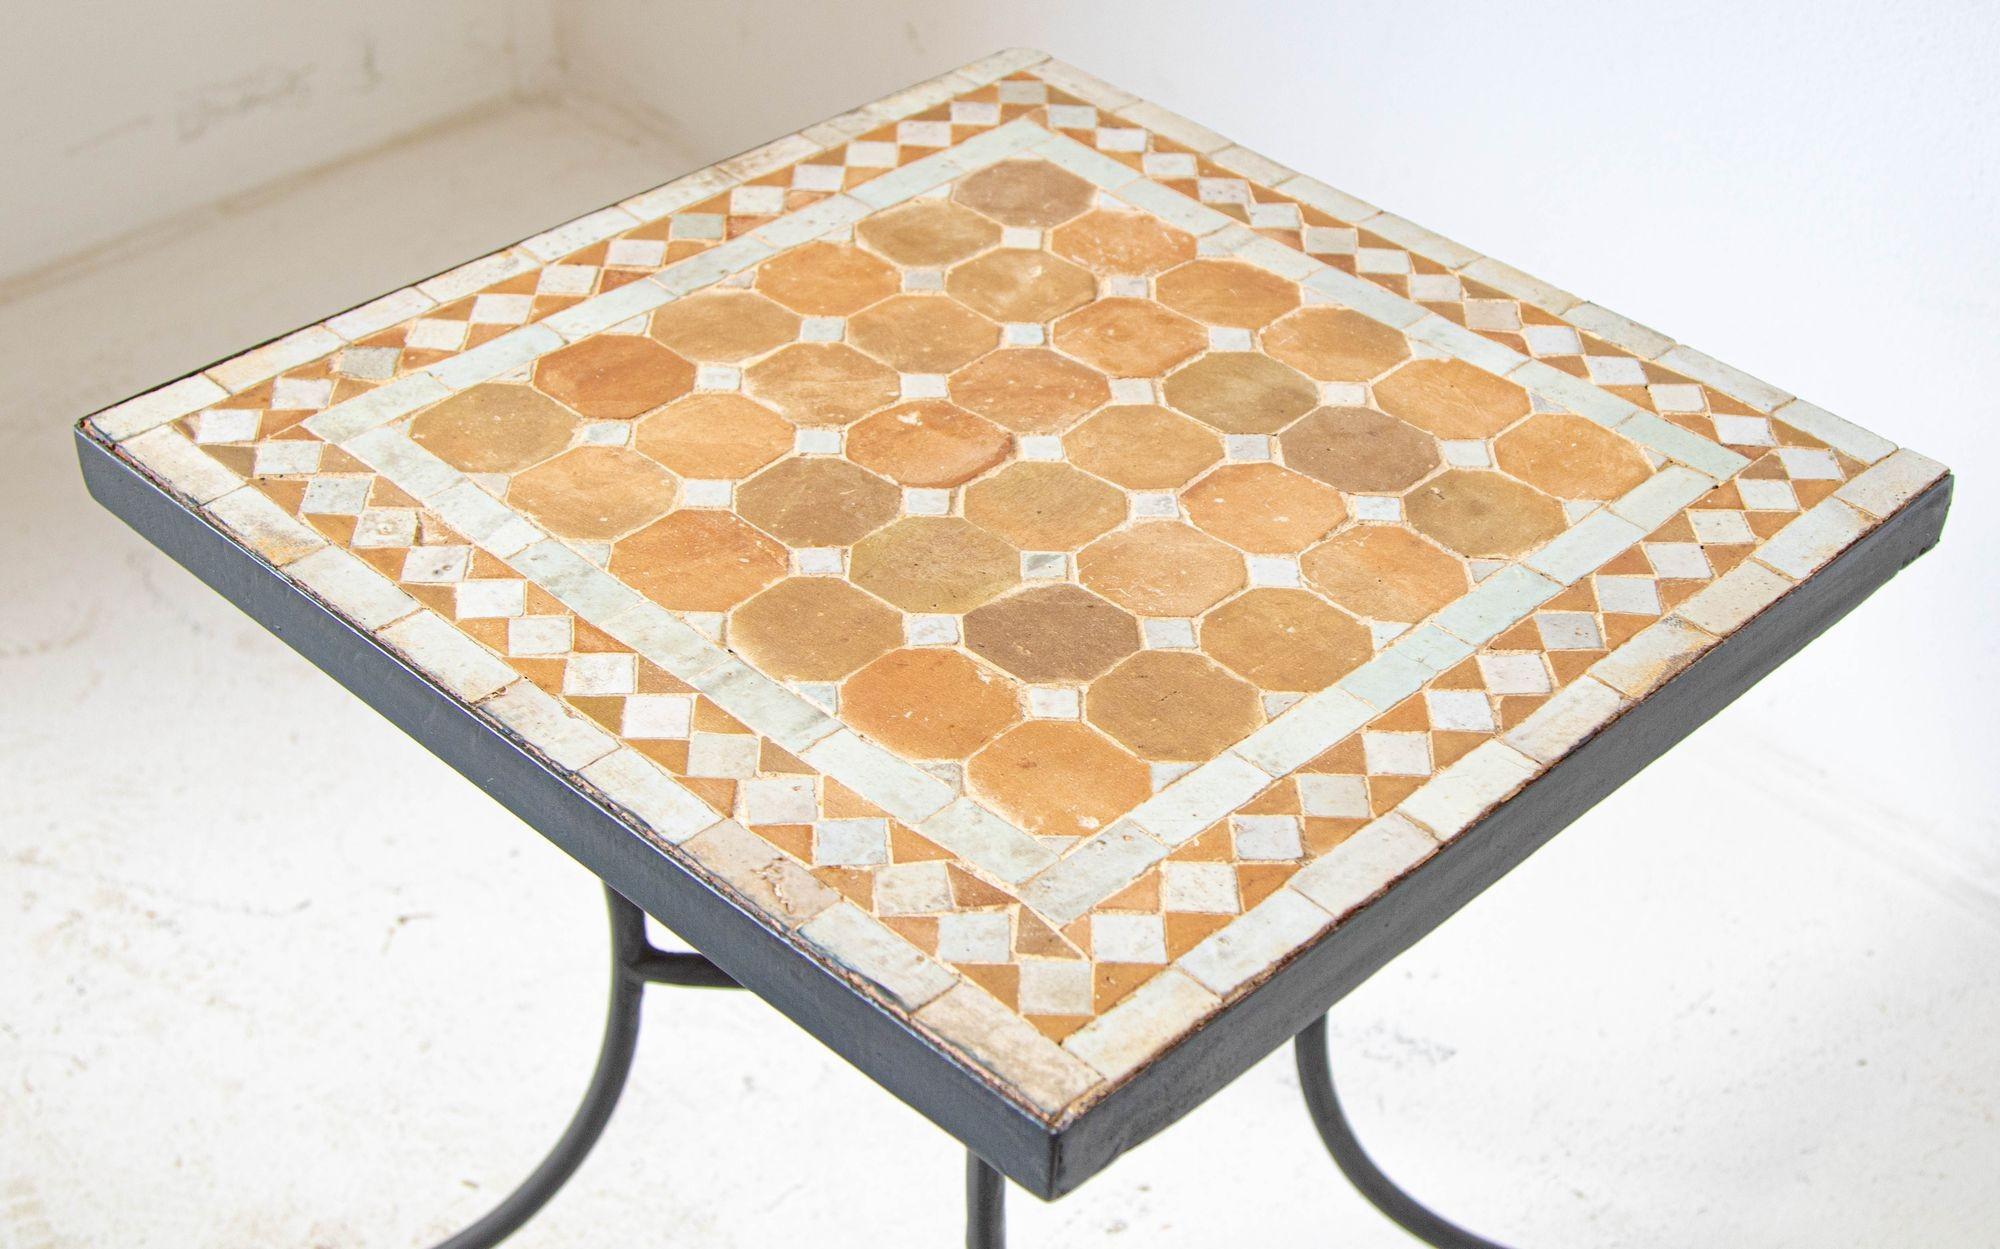 20th Century Moroccan Mosaic Tile Table Square Shape Outdoor Side Table